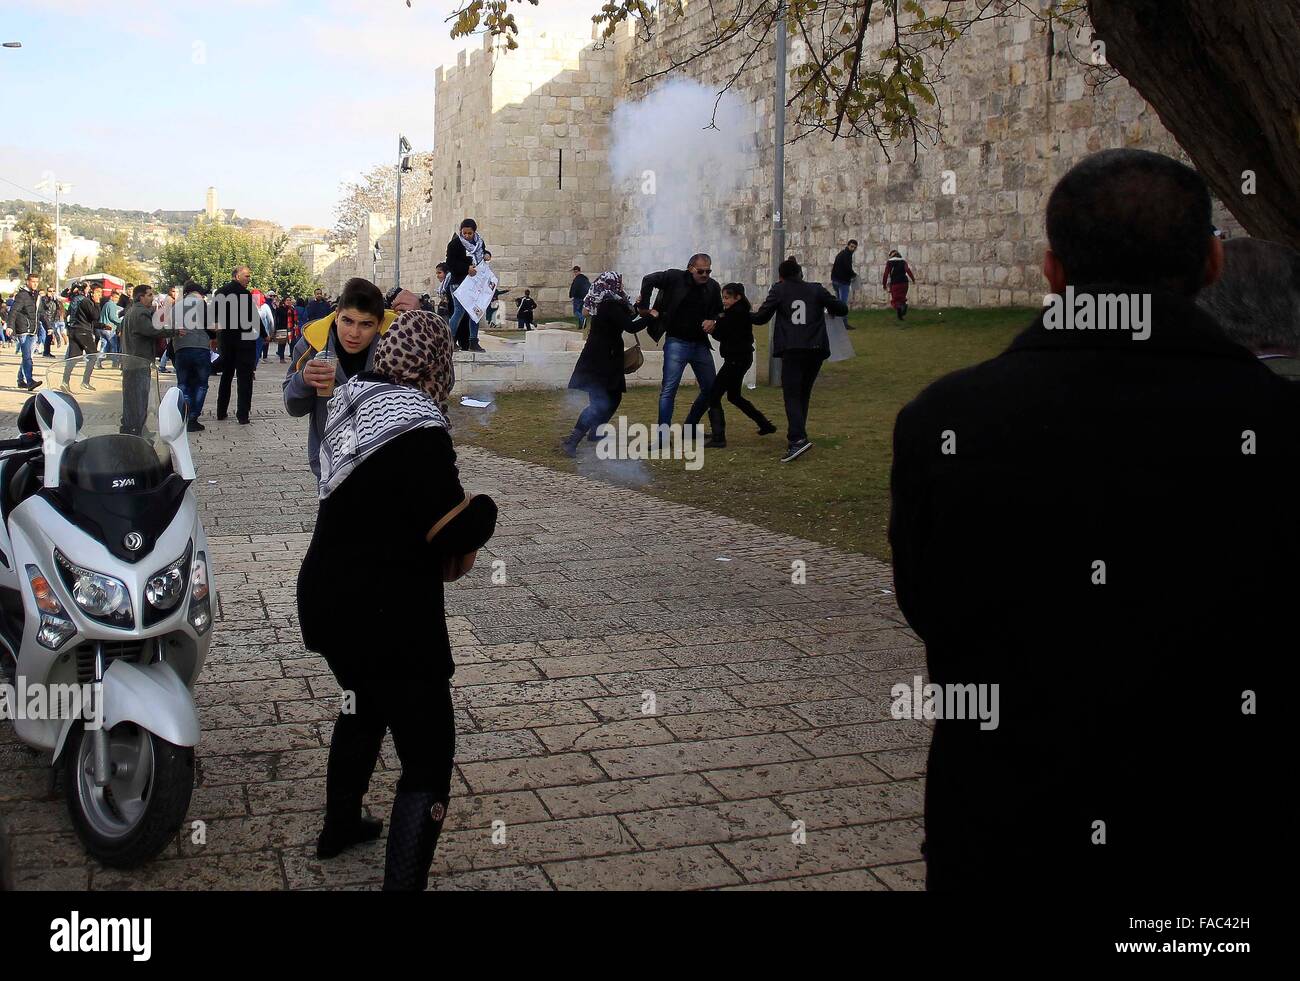 Jerusalem. 26th Dec, 2015. Palestinians take part in a protest outside Jerusalem's Old City on Dec. 26, 2015. Palestinians protested on Saturday, demanding the return of the bodies who have been killed during the latest wave of violence with Israel. © Muammar Awad/Xinhua/Alamy Live News Stock Photo